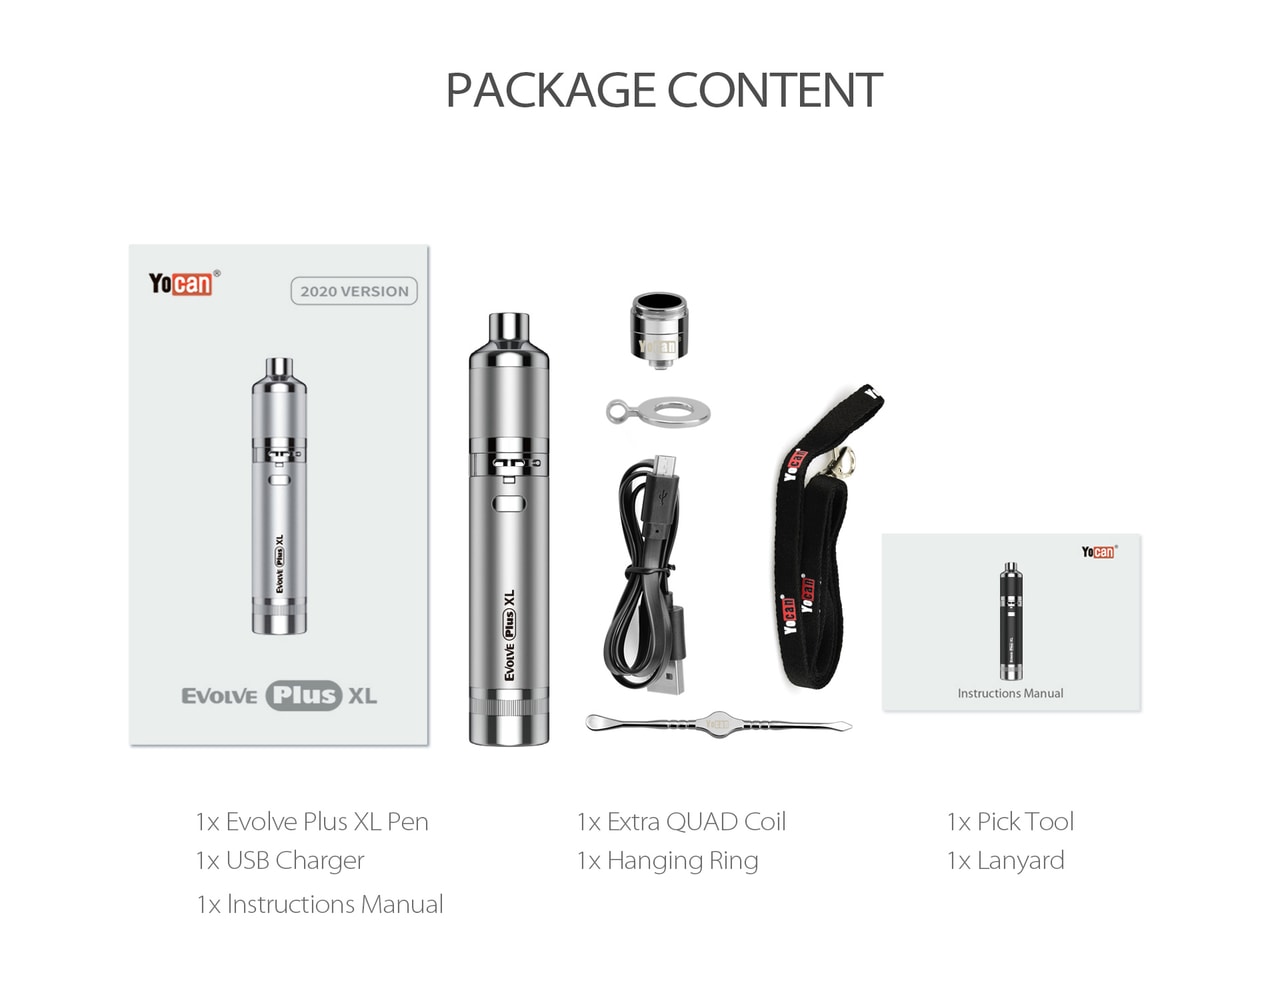 Yocan Evolve Plus XL 2020 version package contents